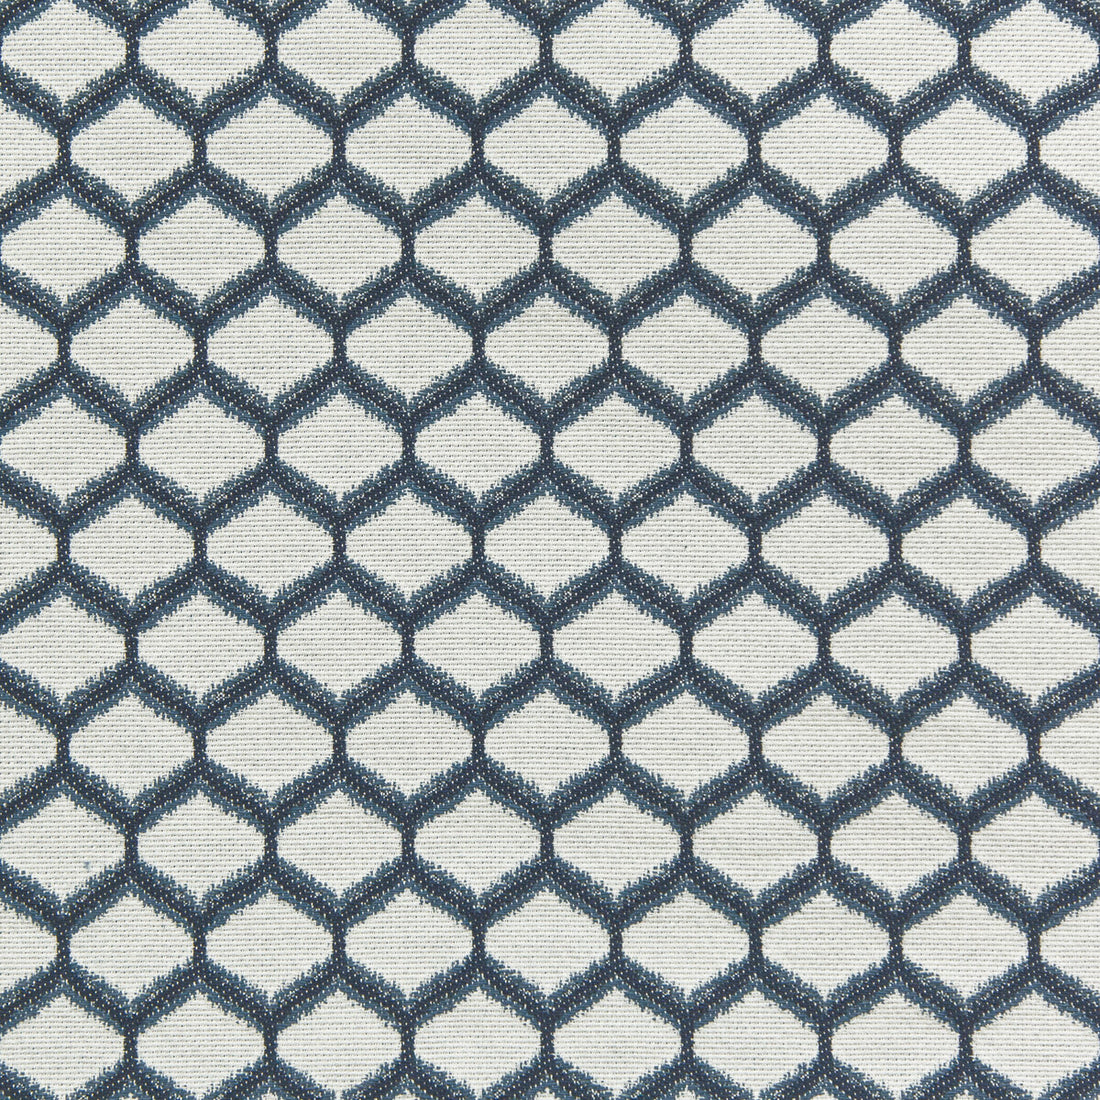 Elmley Weave fabric in navy color - pattern 2020105.50.0 - by Lee Jofa in the Linford Weaves collection